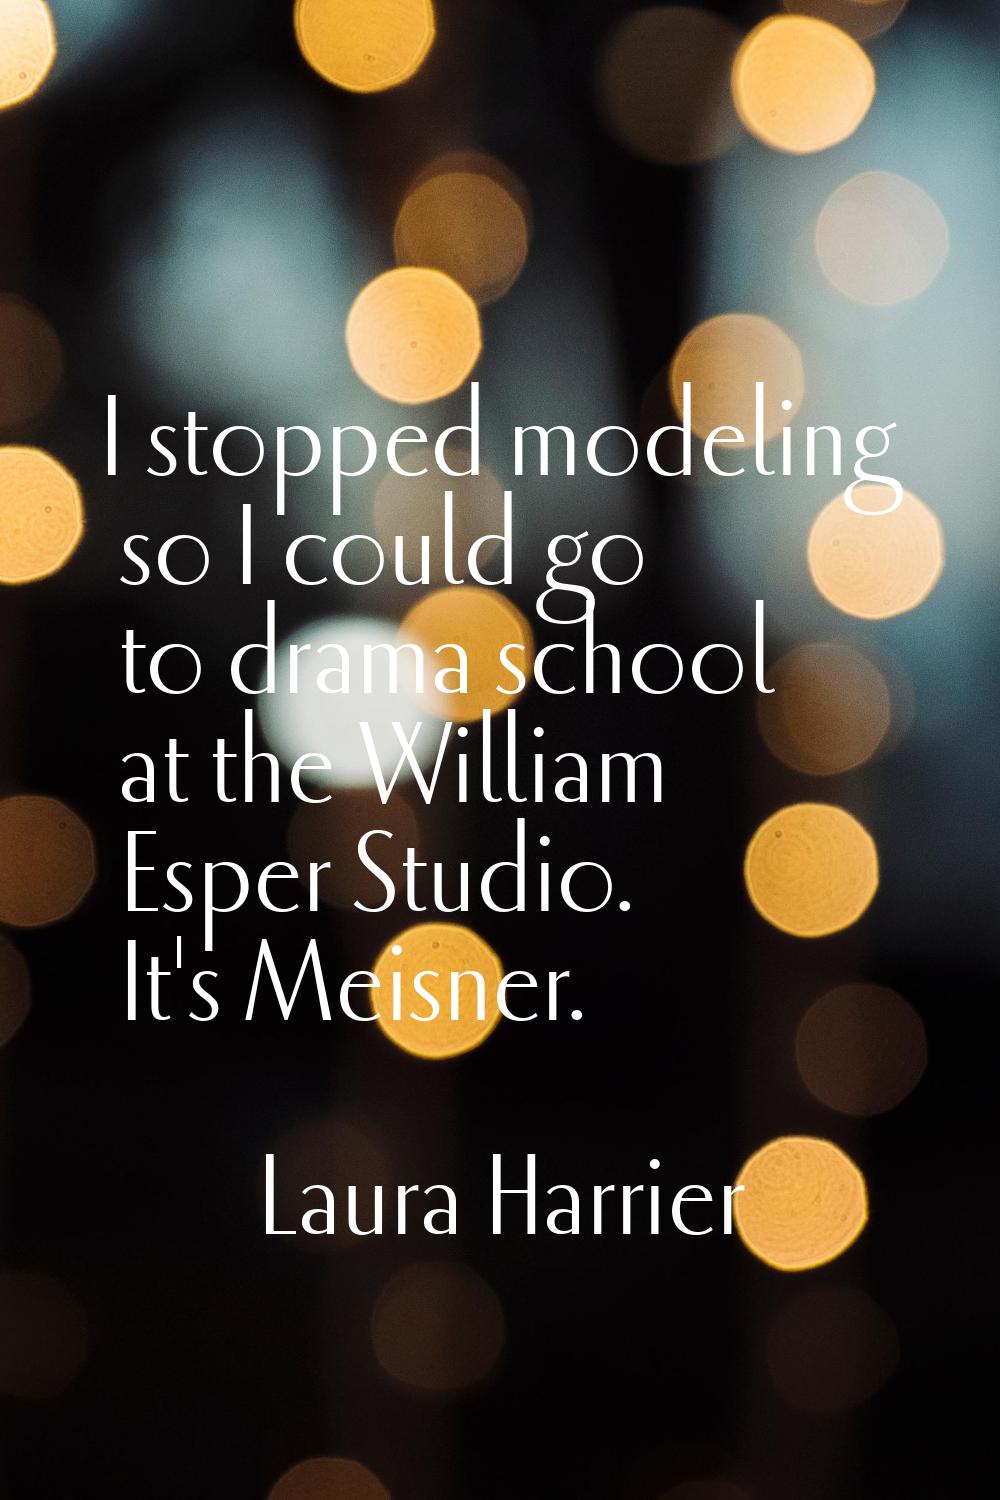 I stopped modeling so I could go to drama school at the William Esper Studio. It's Meisner.